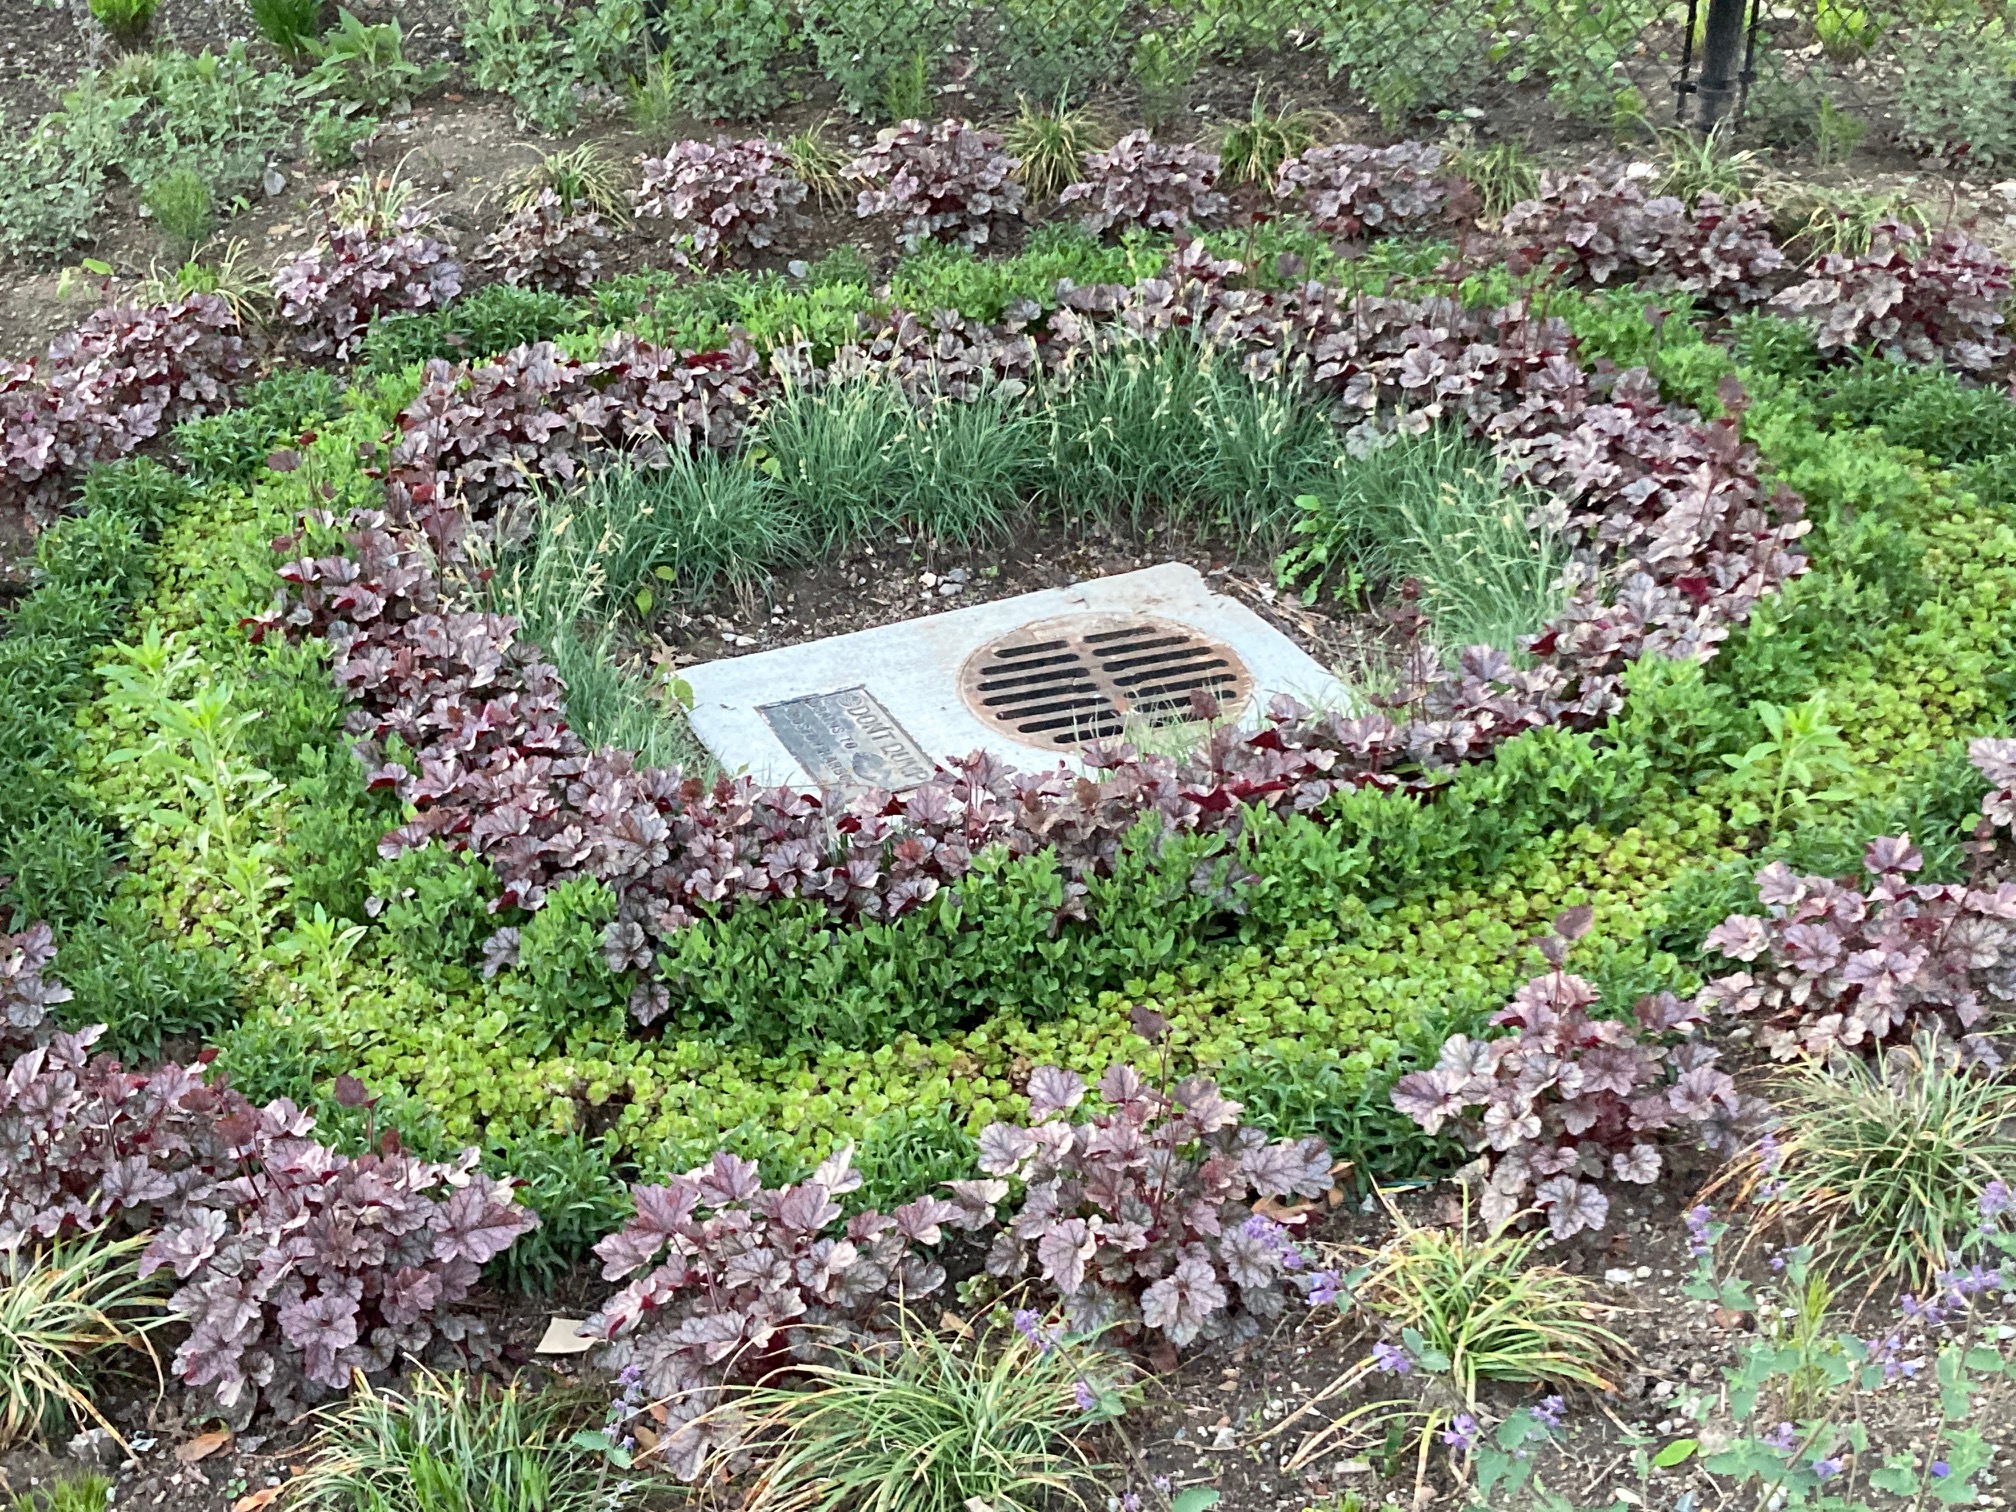 Close up photo of plants in concentric circles that form a rain garden in dirt near some houses.